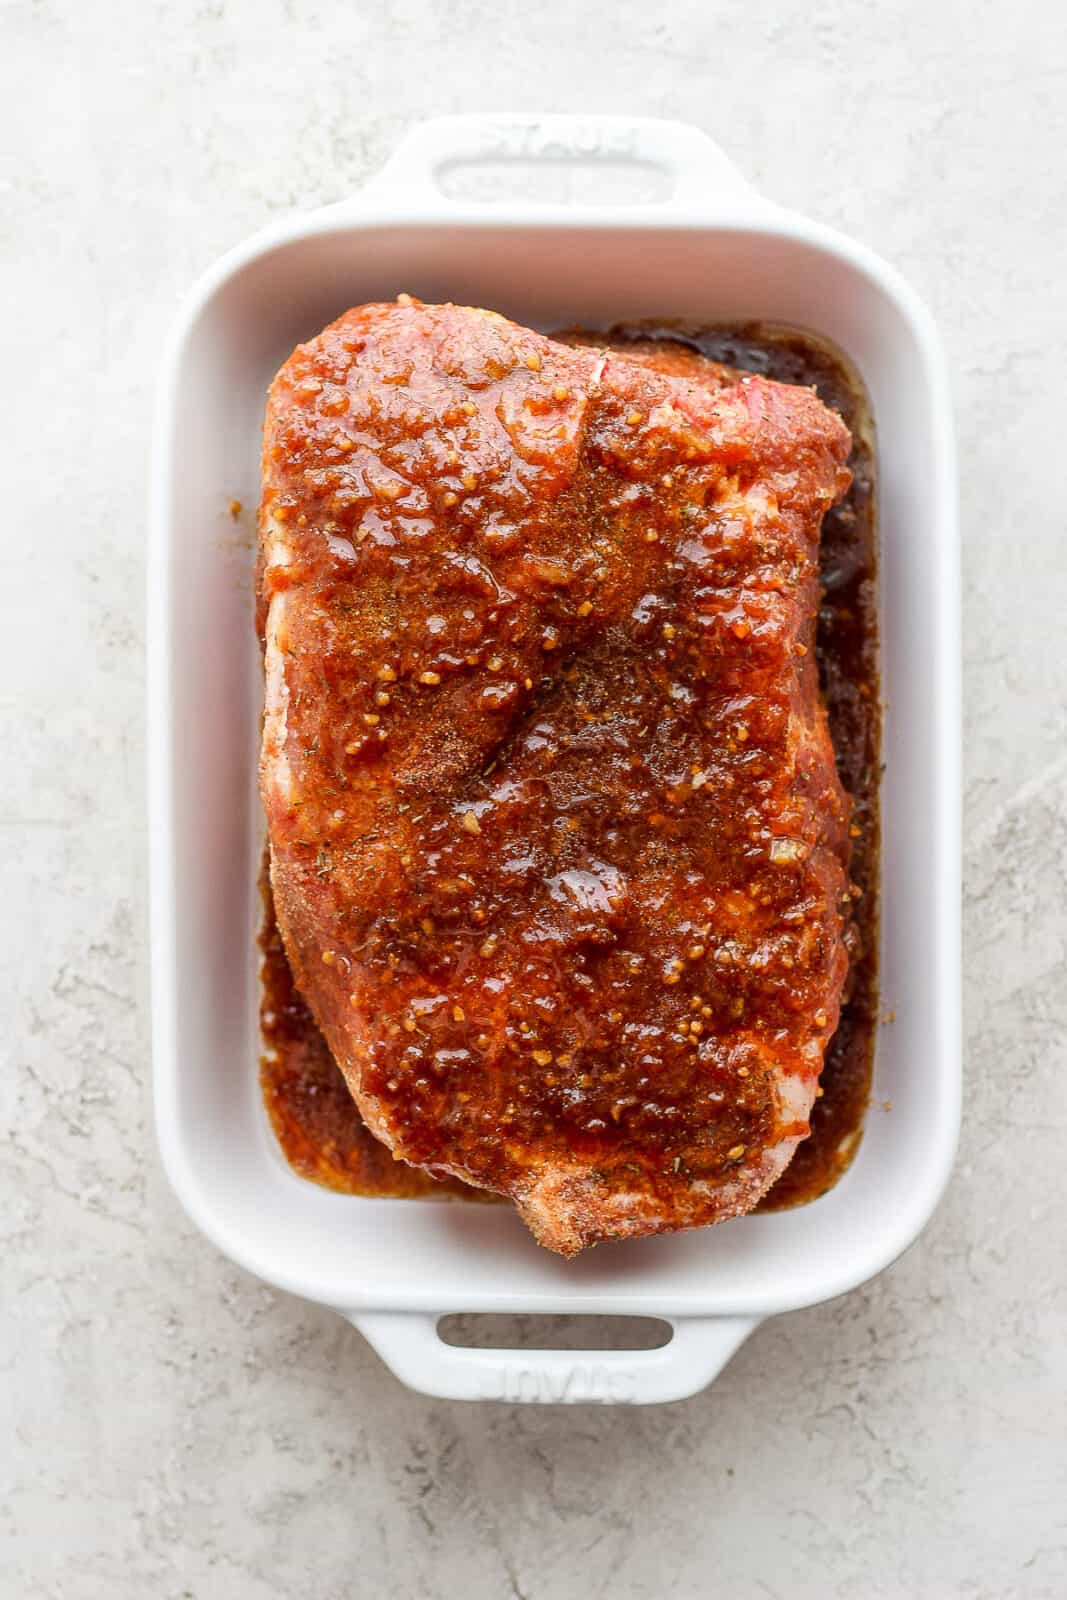 Pork roast covered in seasoning and marinade in a dish.